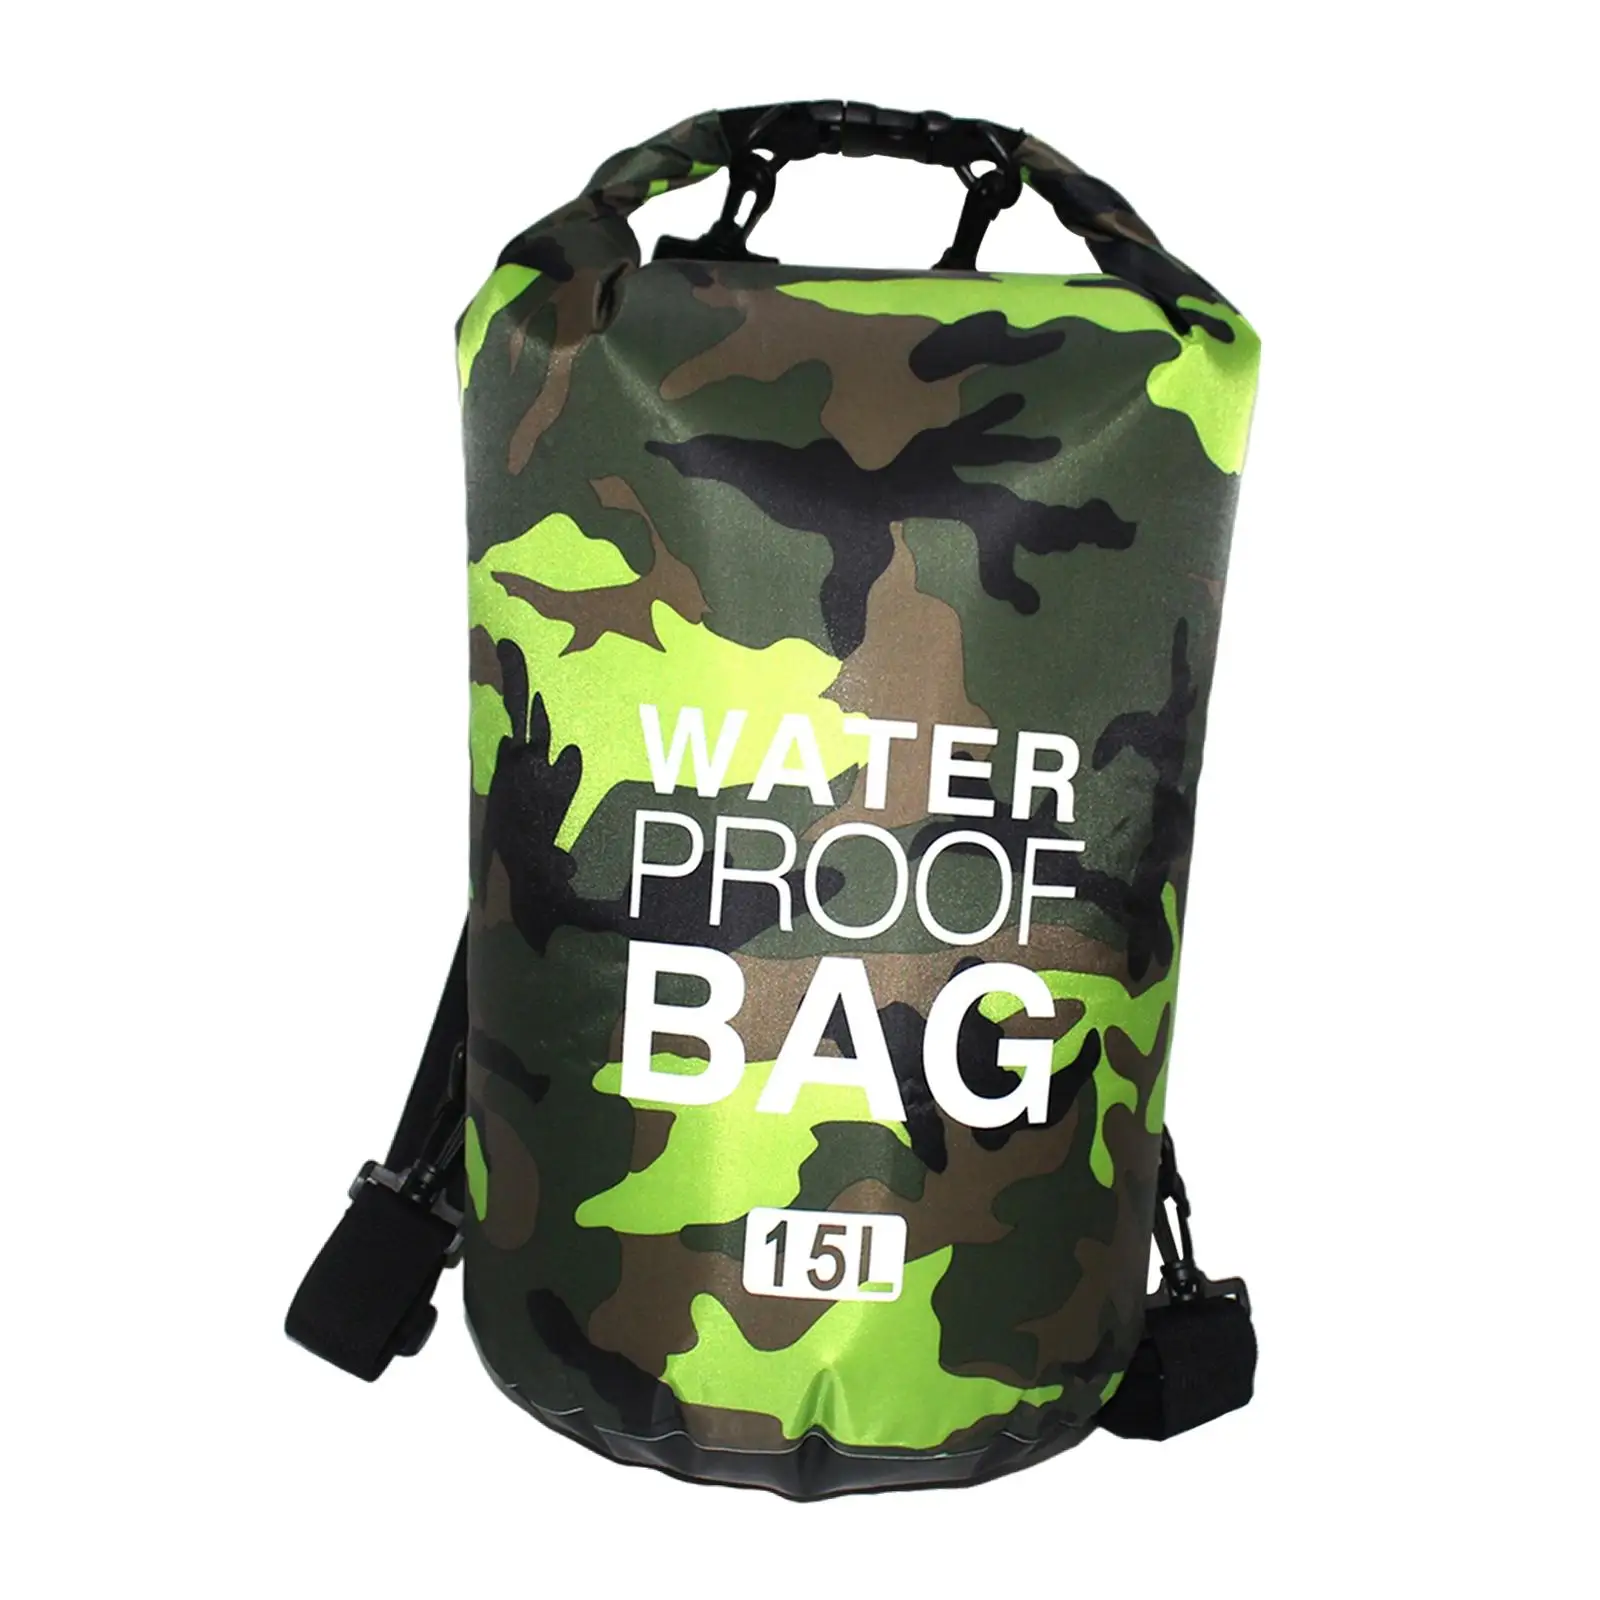 Waterproof Dry Bag Airtight Portable for Camping Hiking Outdoors